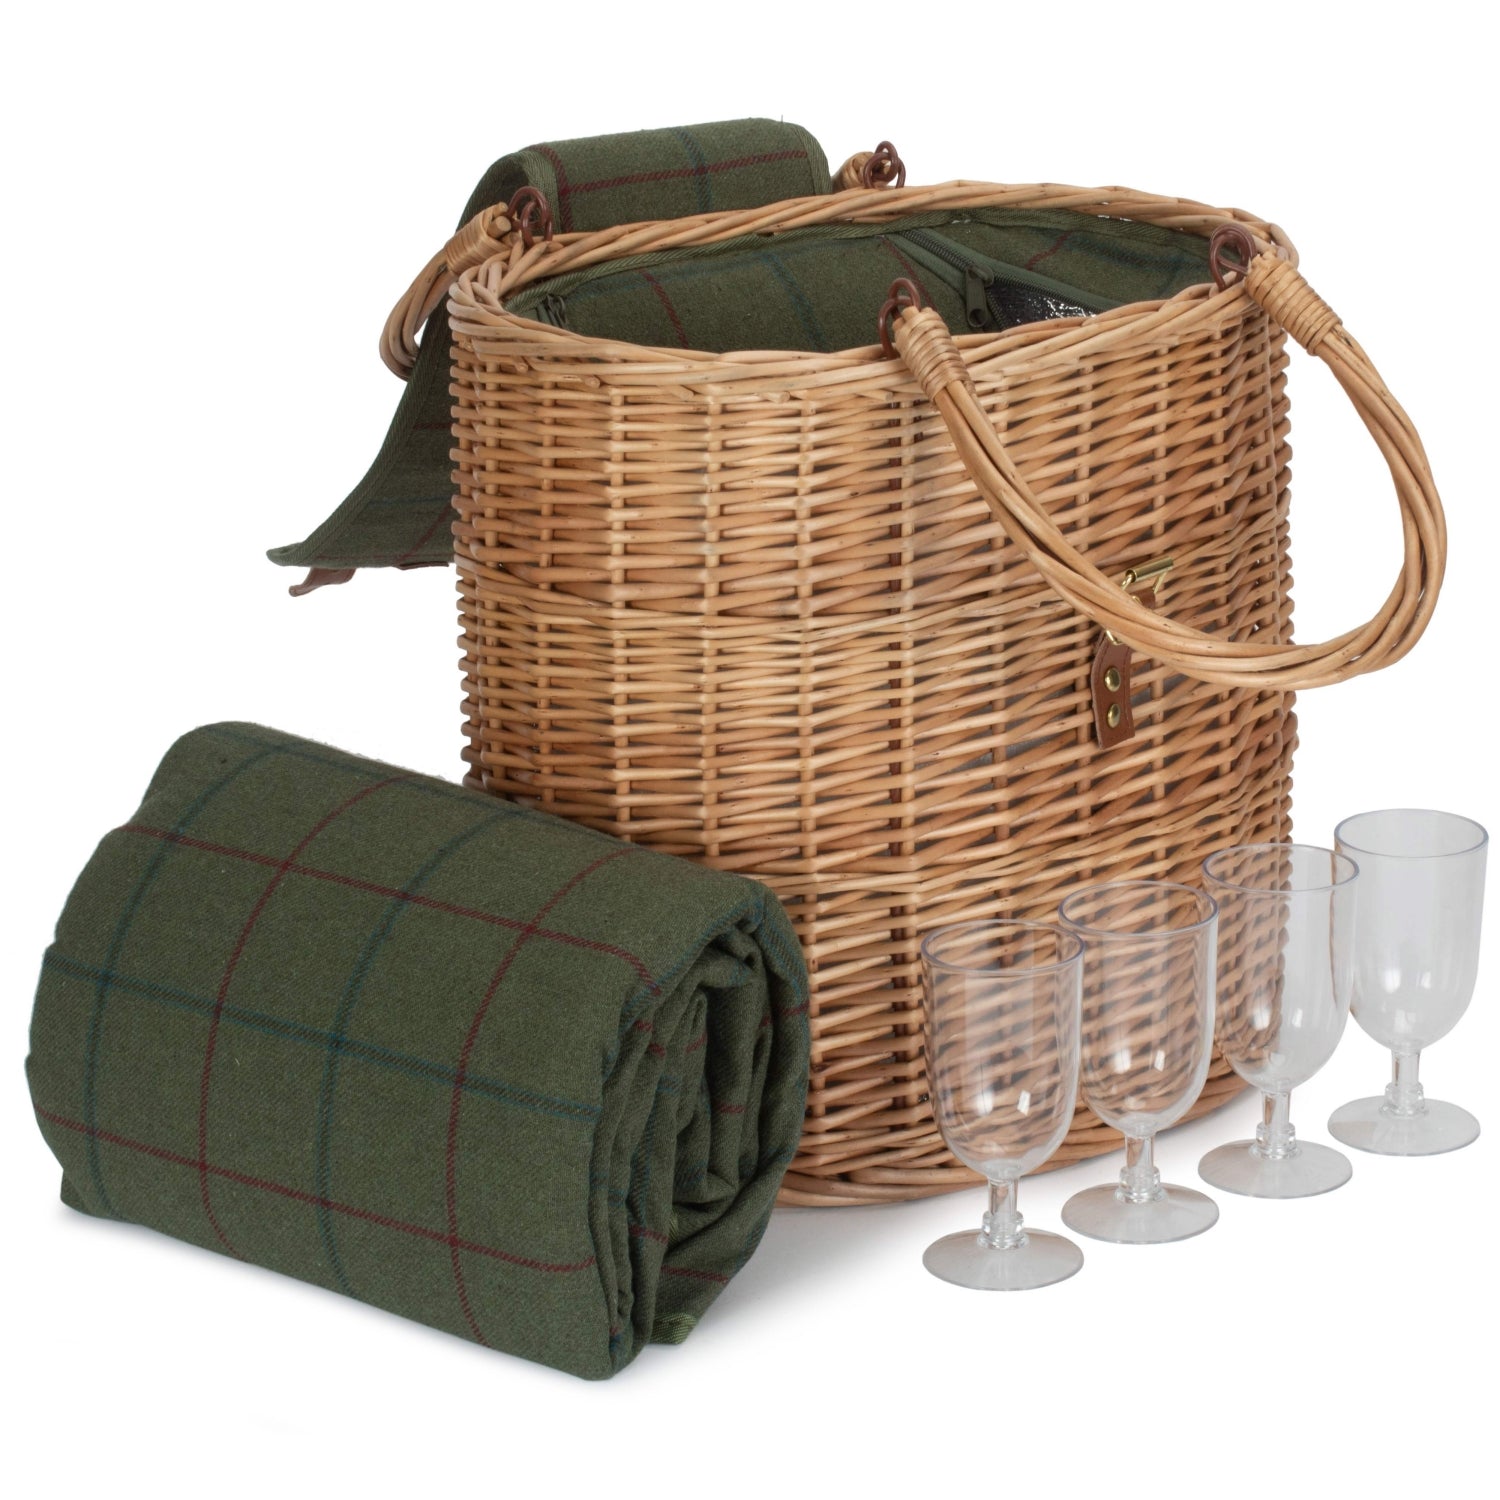 Red Hamper Oval Fitted Cool Bag Drinks Picnic Wicker Basket